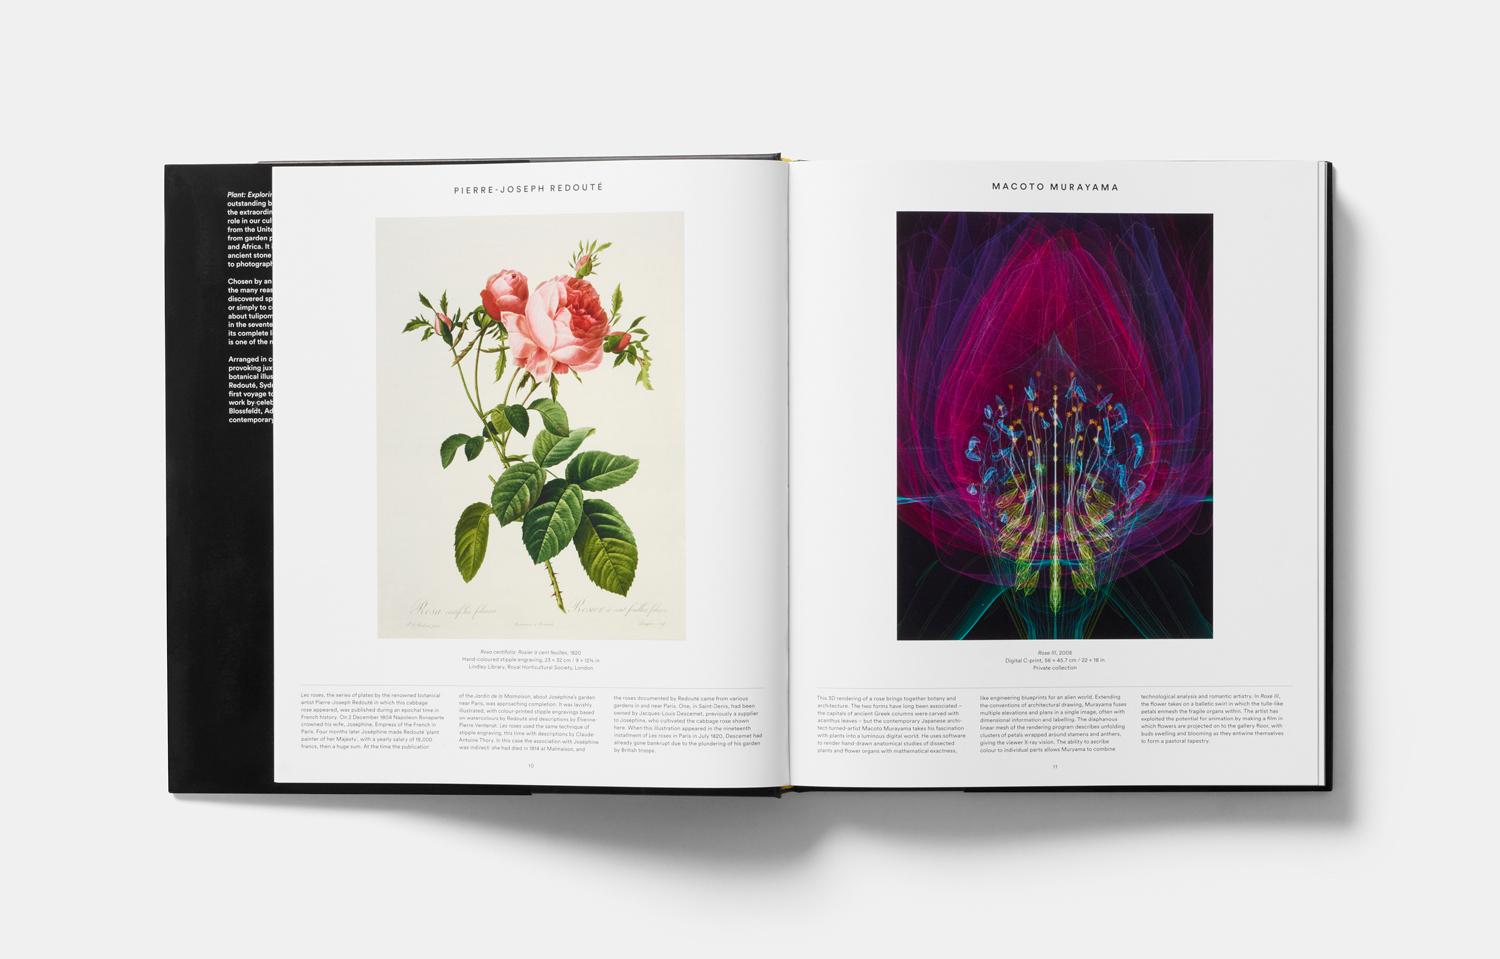 The ultimate gift for gardeners and art-lovers, featuring 300 of the most beautiful and pioneering botanical images ever

Following in the footsteps of the international bestseller Map: Exploring the World, this fresh and visually stunning survey